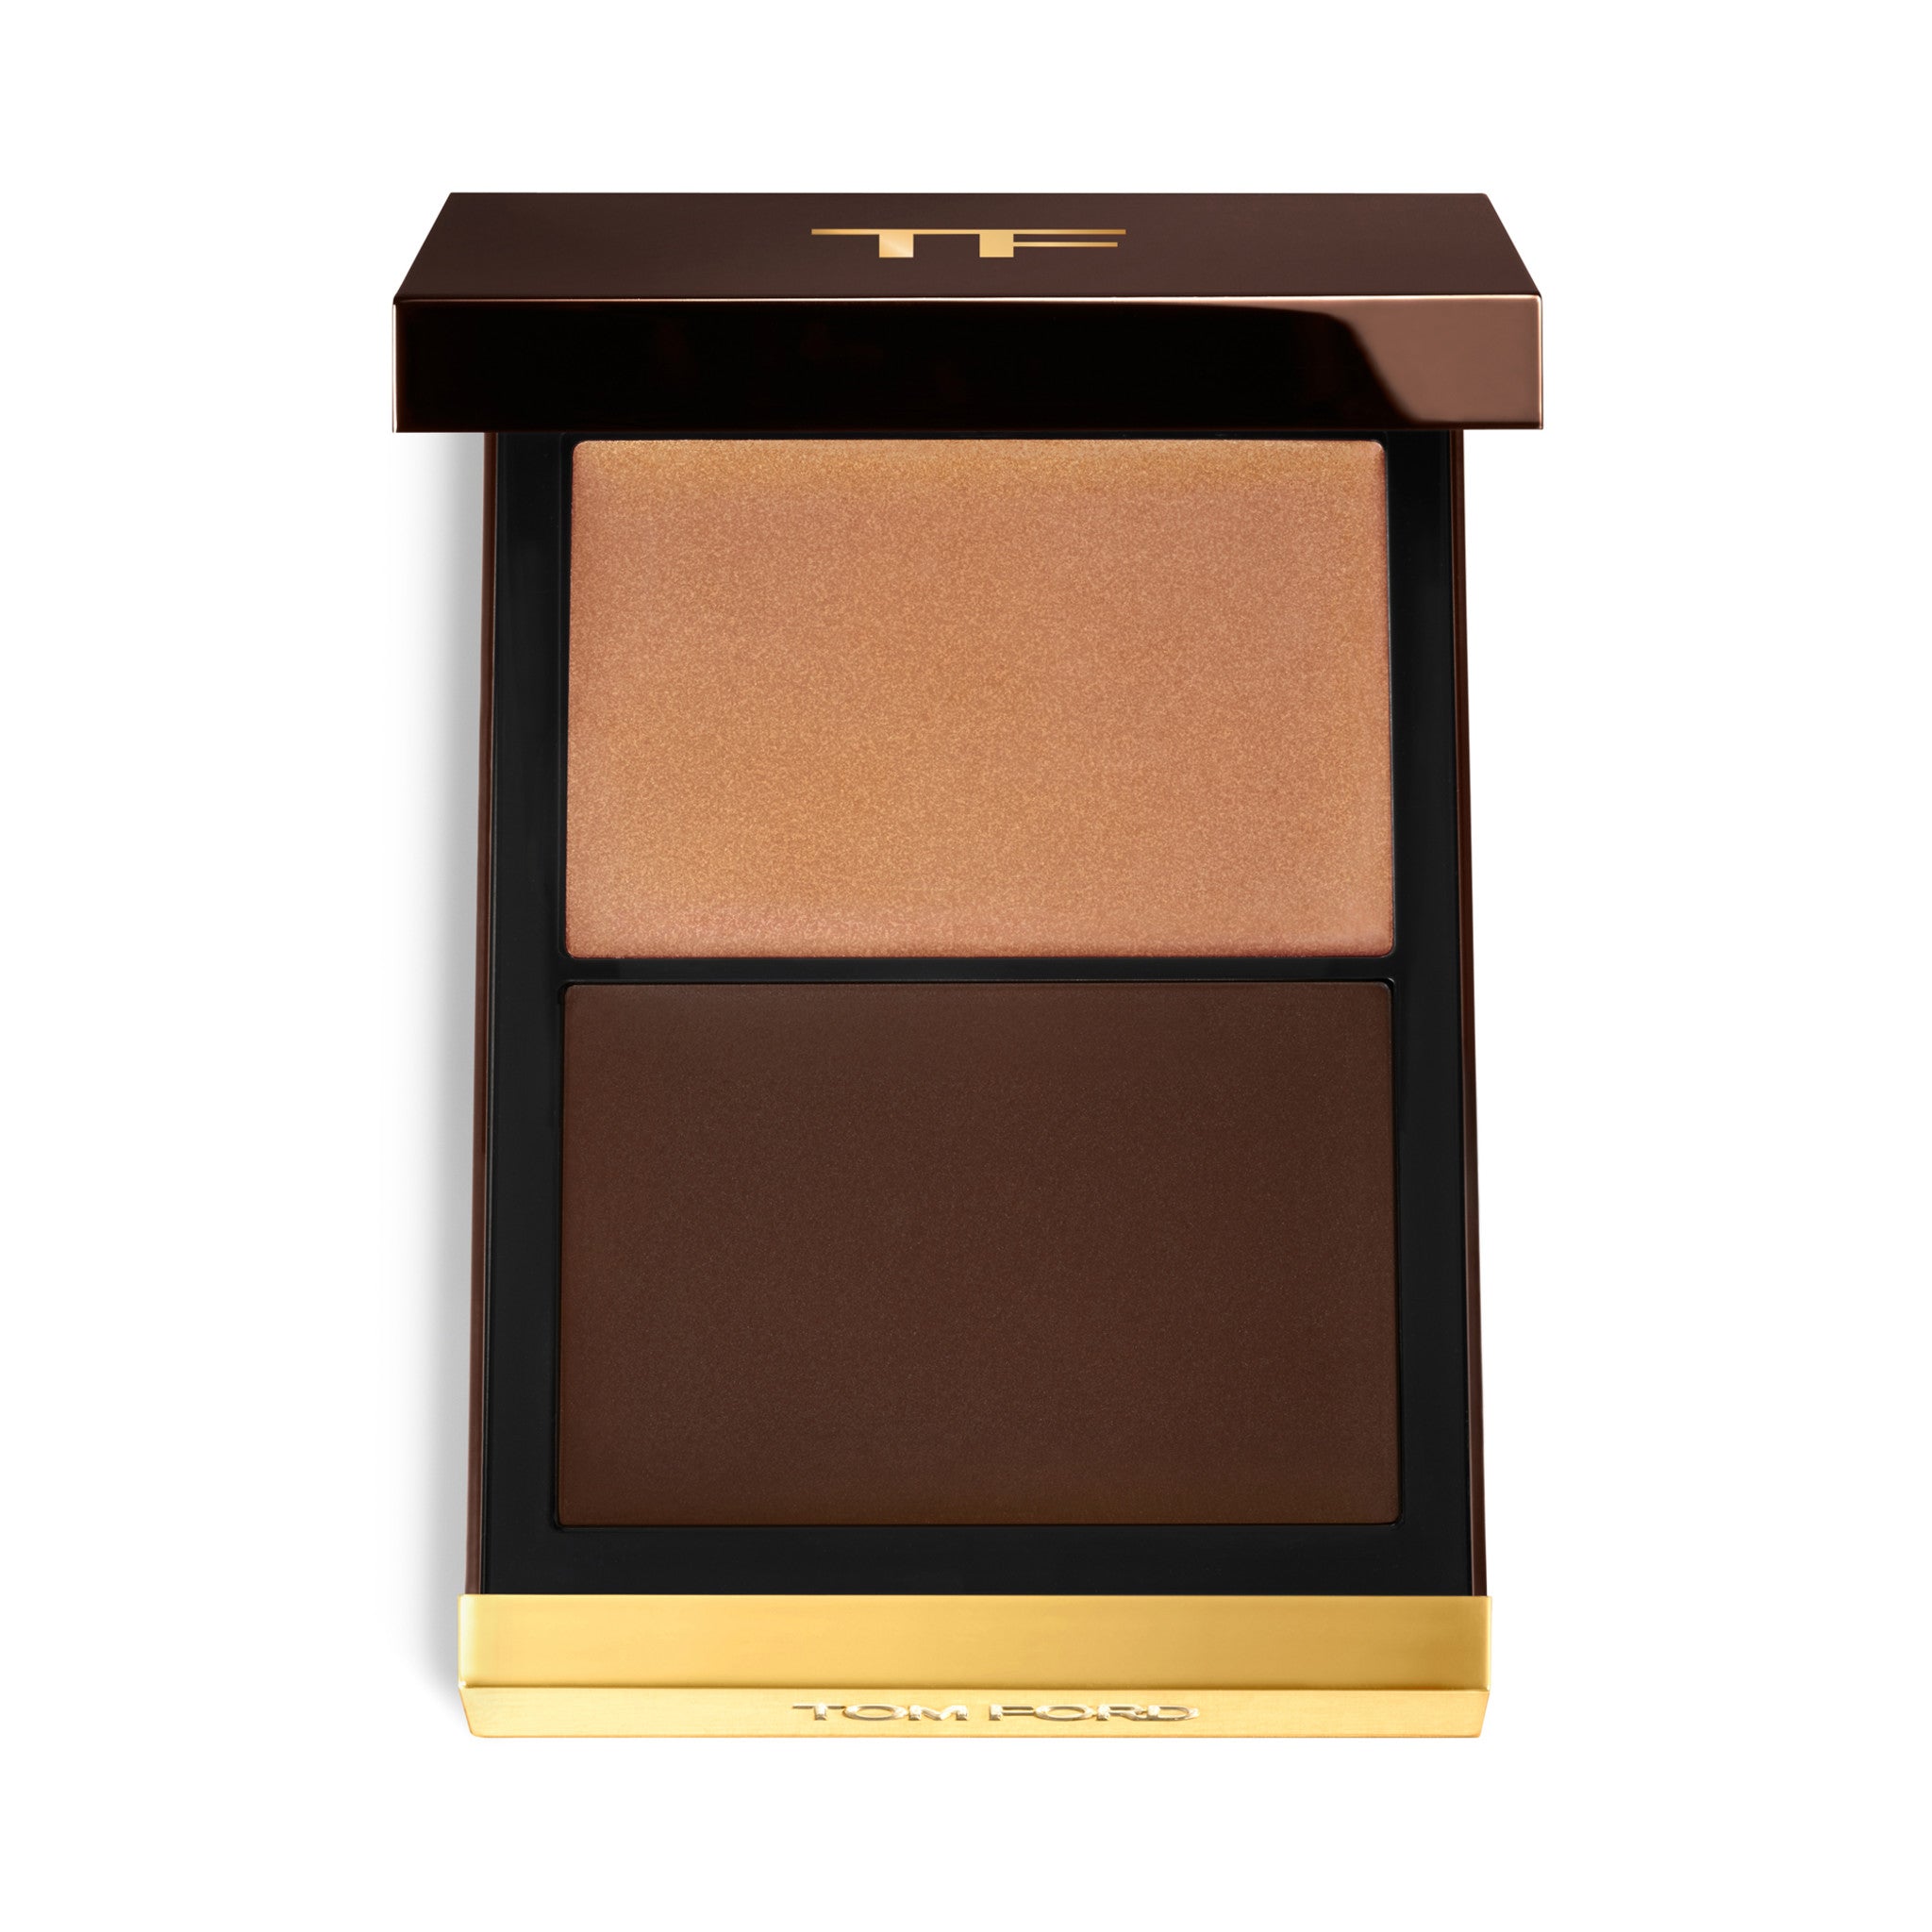 Tom Ford Shade and Illuminate Contour Duo Color/Shade variant: Intensity 3.0 main image.